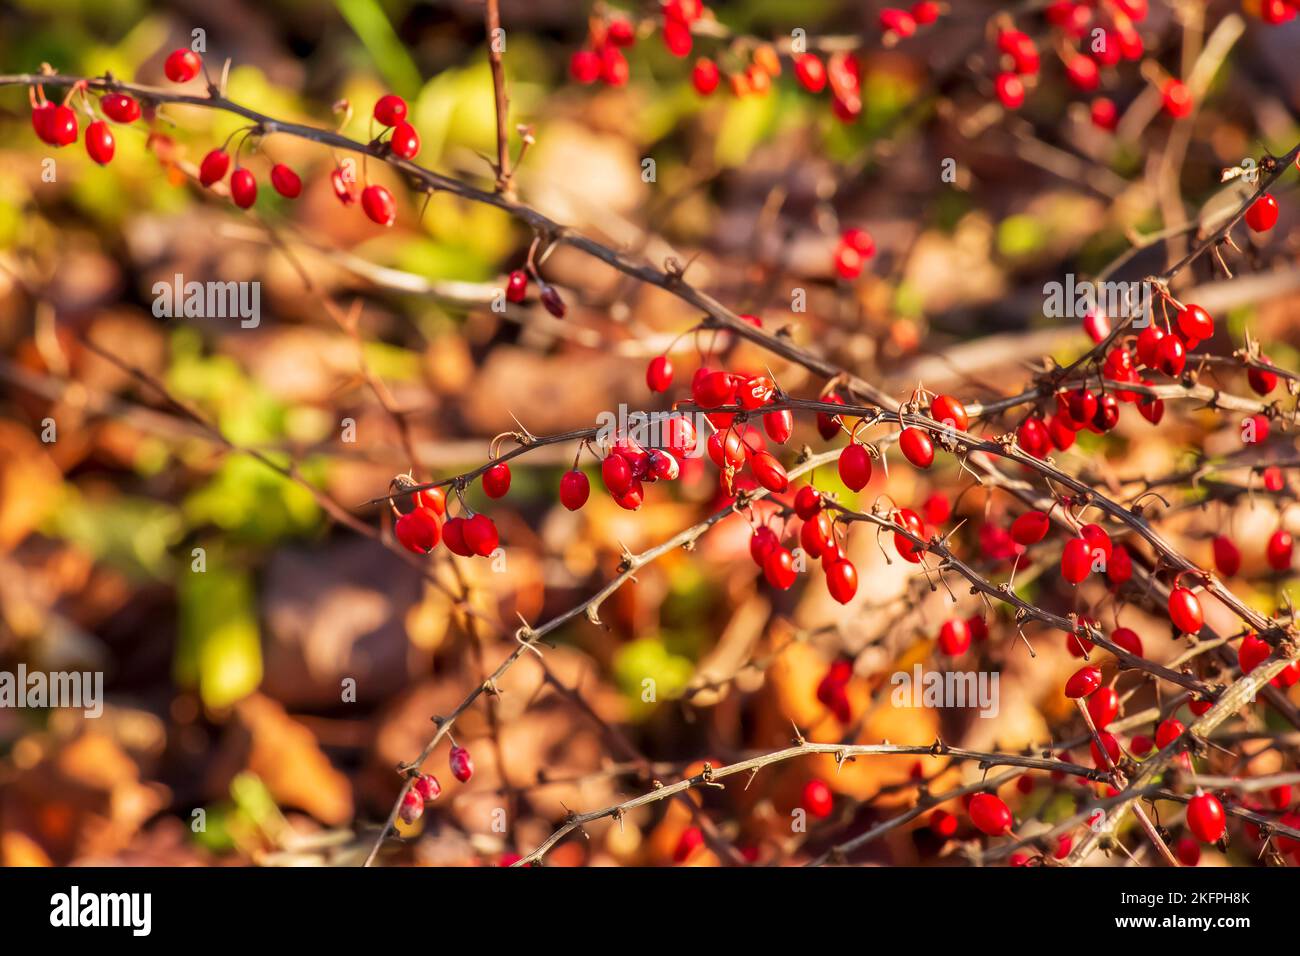 Red fruits of barberry on a branch in the autumn garden, close-up. Ripe Berberis sibirica berries are ready for harvest. Stock Photo